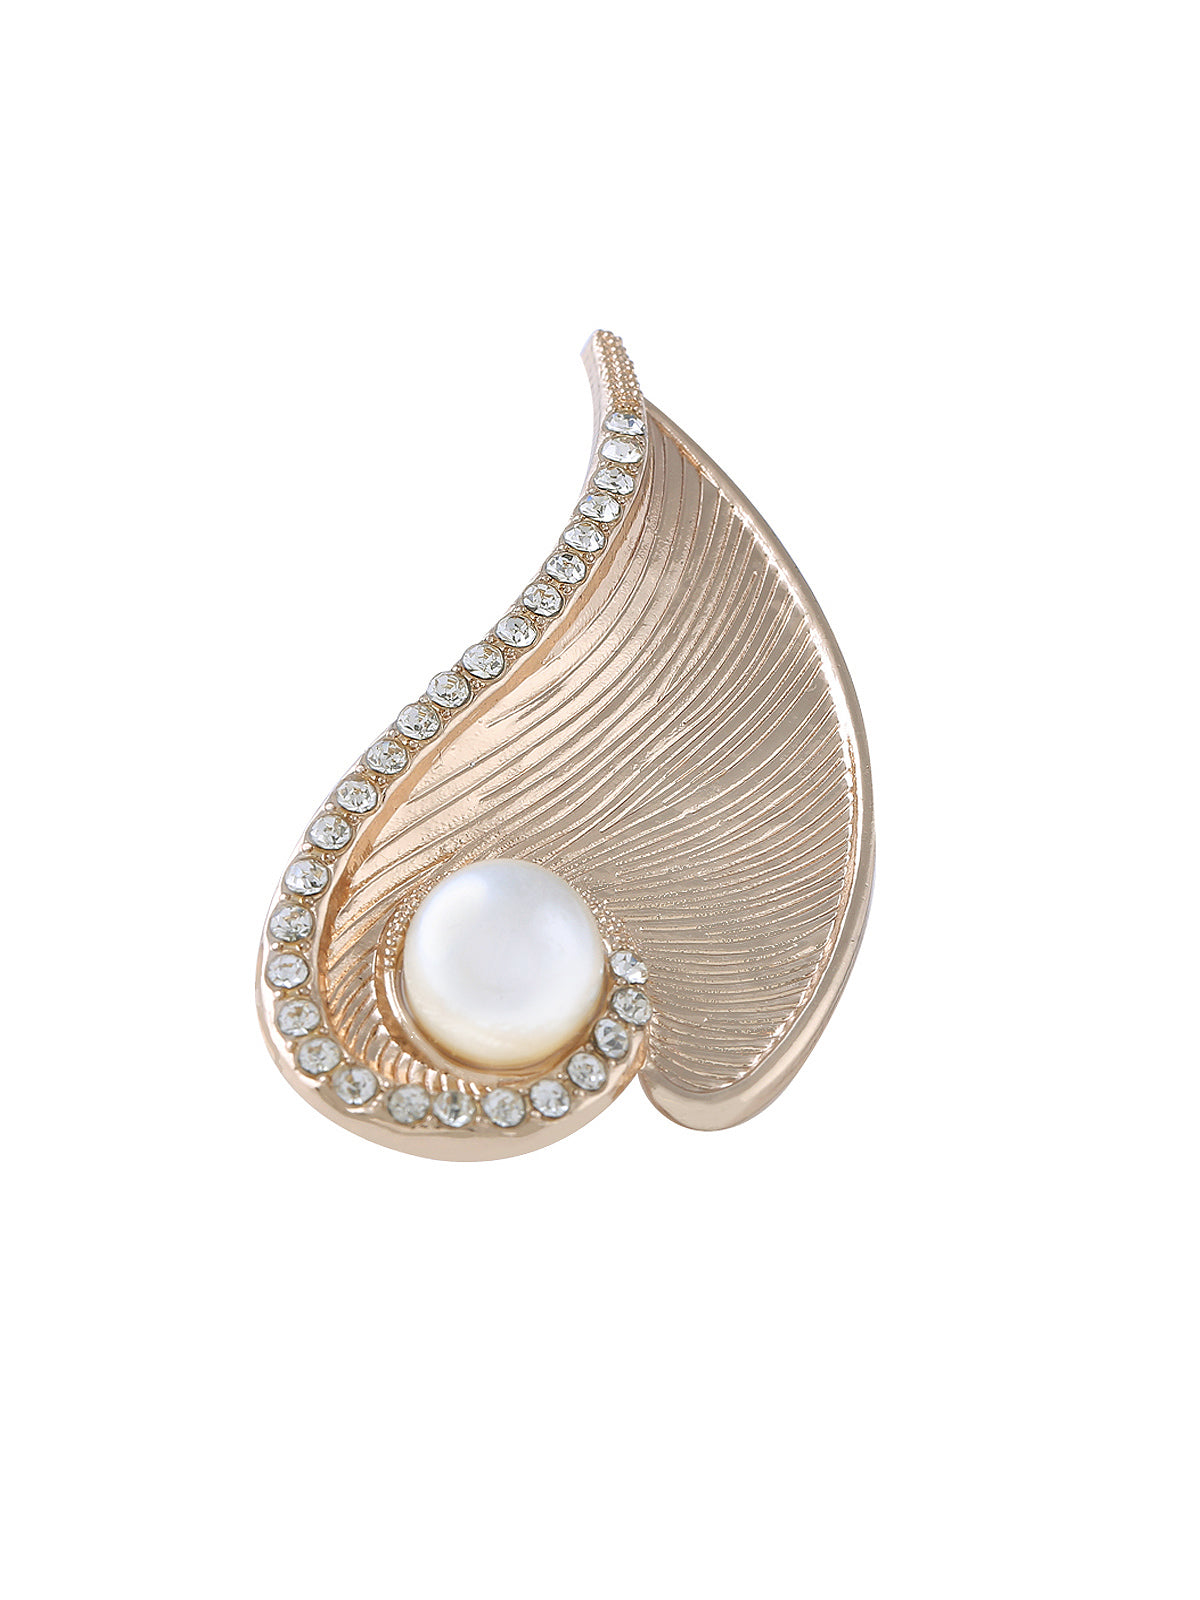 Shiny Golden Diamond Leaf with Pearl Brooch Pin